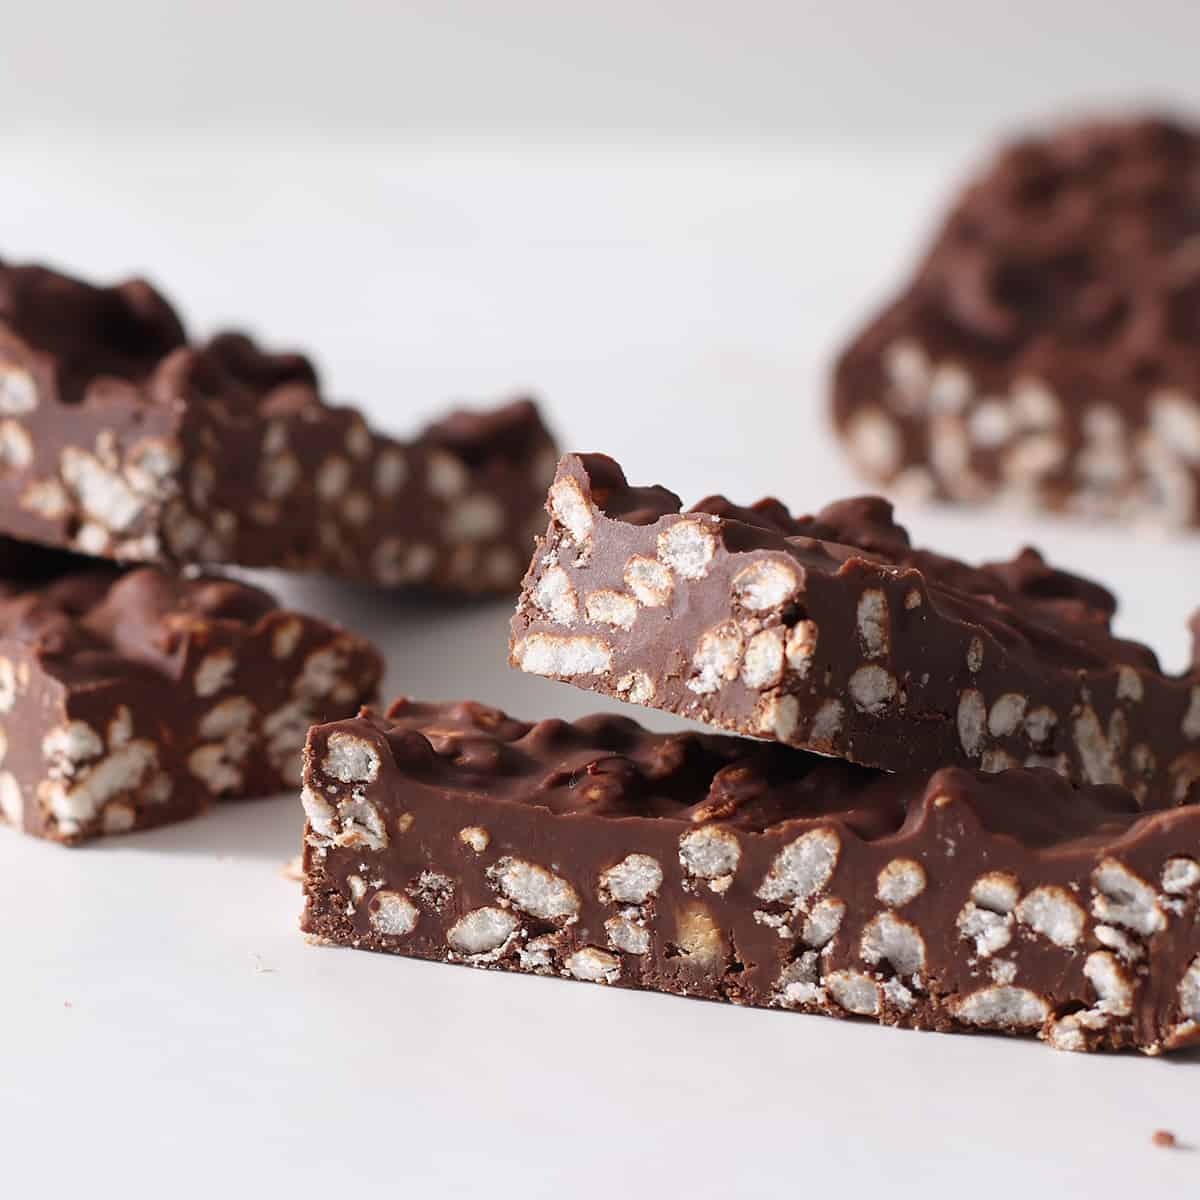 crunch bars piled on each other.